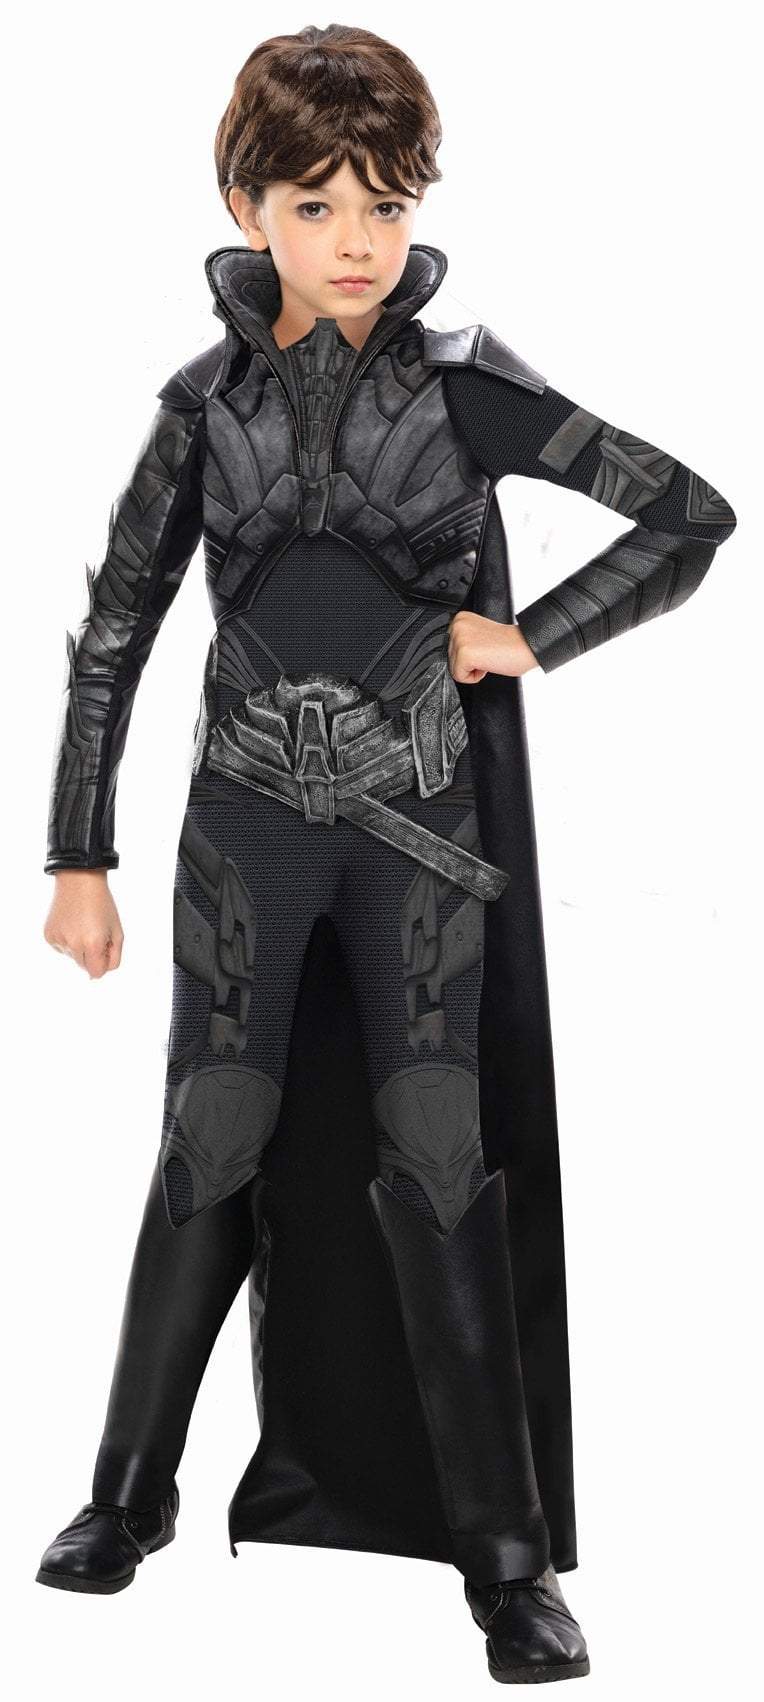 Girls Deluxe Faora Costume - Superman - JJ's Party House